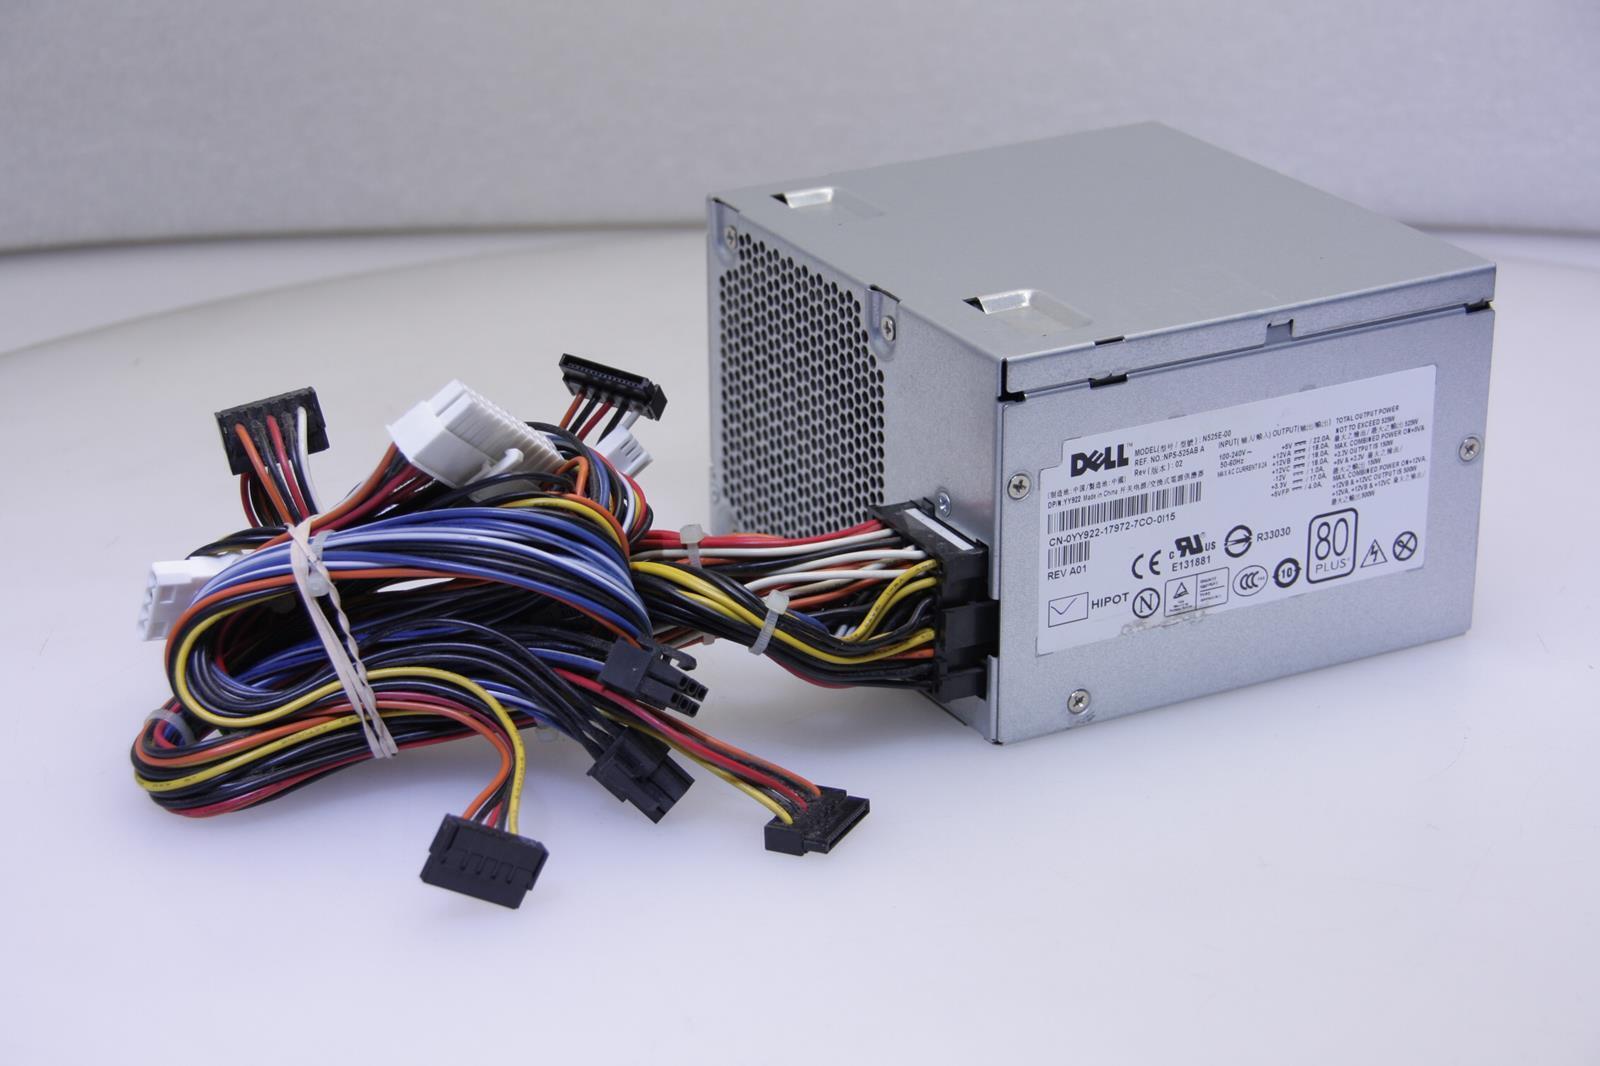 Dell YY922 PowerEdge T410 T3400 Power Supply 525W W/CABLE.TESTED. SKU194022